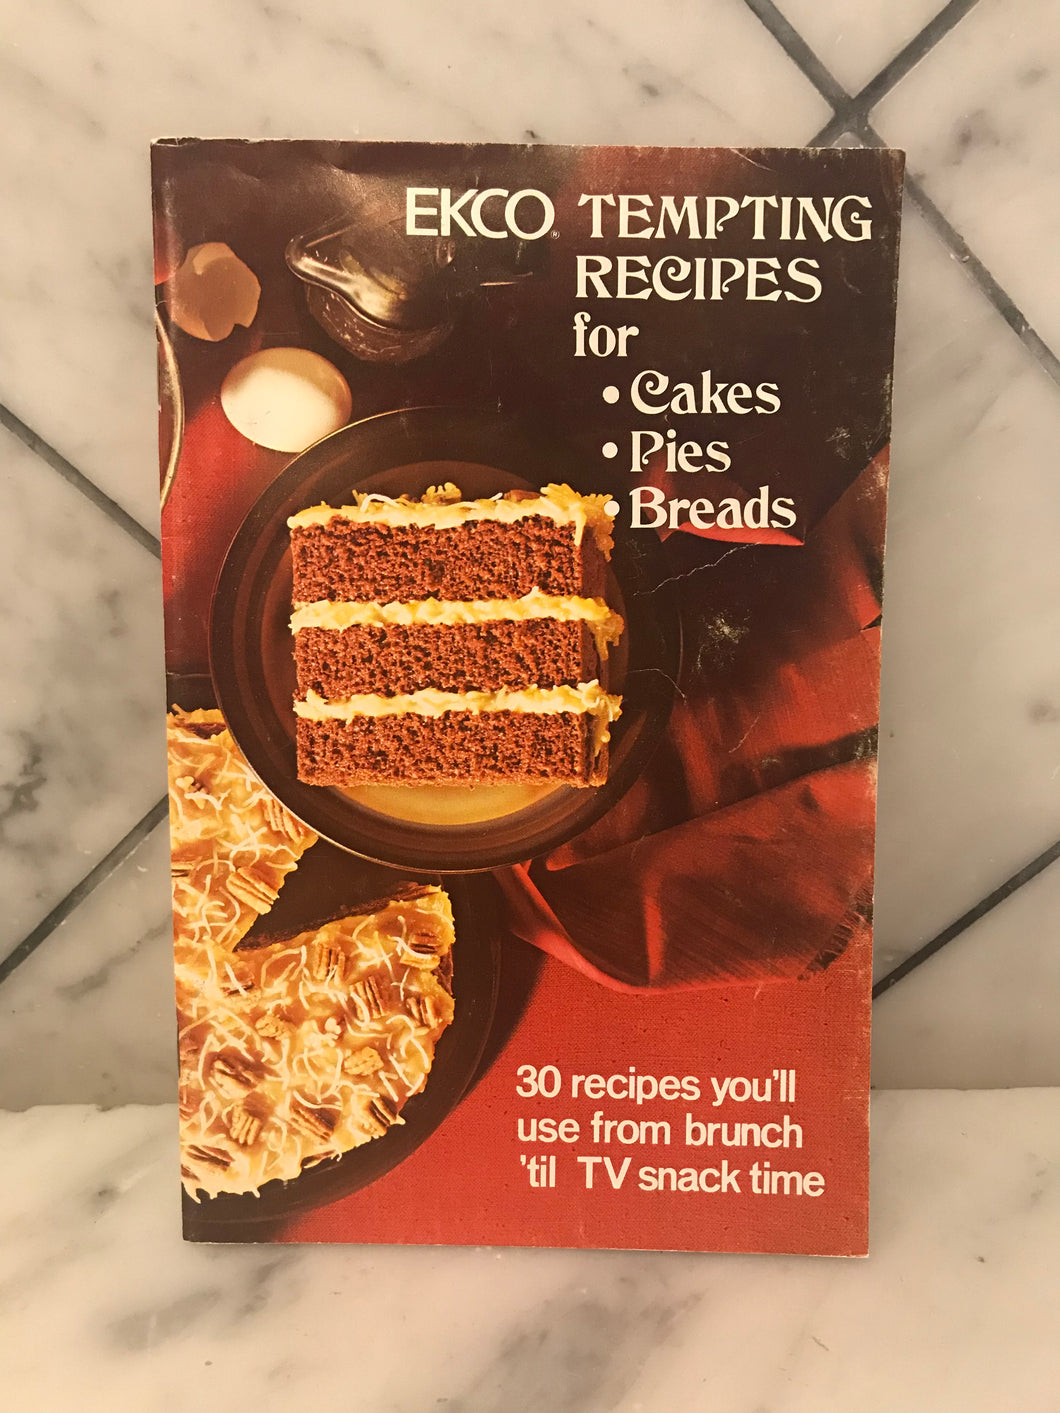 Ekco Tempting Recipes for Cakes, Pies, Breads, 30 Recipes You'll Use from Brunch 'til TV Snack Time